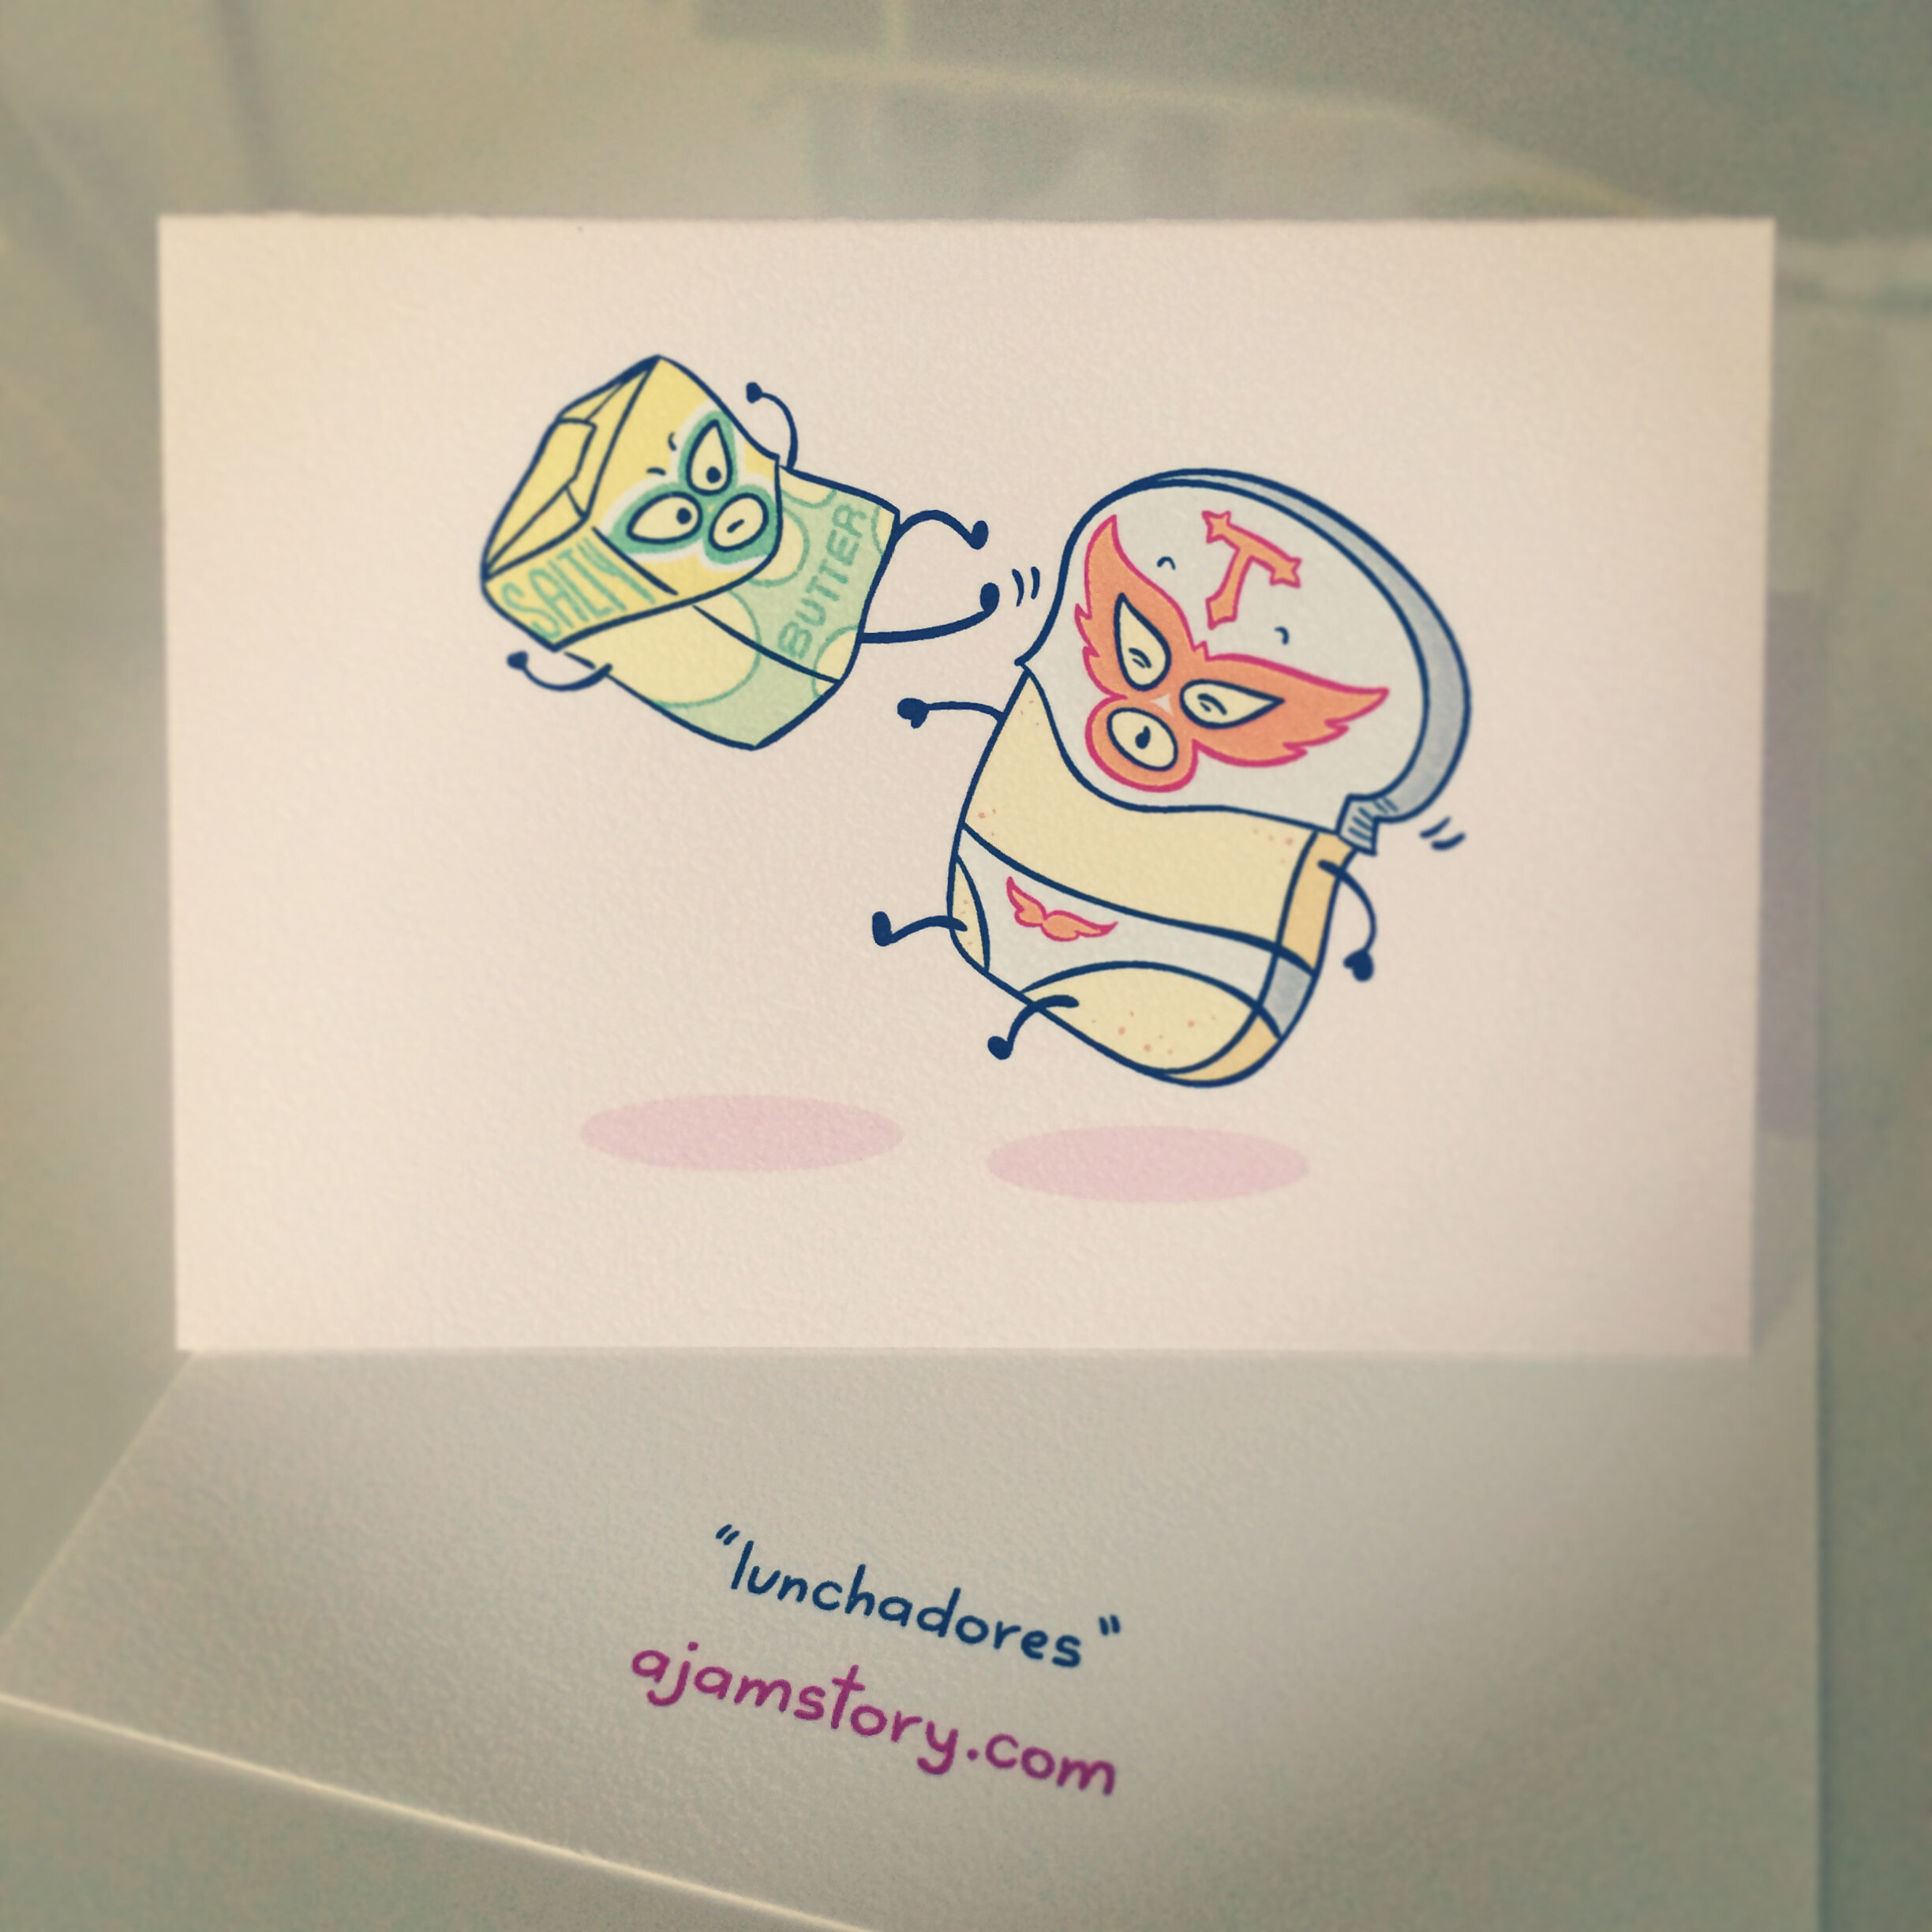   “Lunchadors” : A photo of a small greeting card depicting an illustration of Butter and Toast dressed as Mexican luchadors, with butter in the air kicking, and toast falling backwards. The back of the card says "lunchadors” and “ajamstory.com”. 